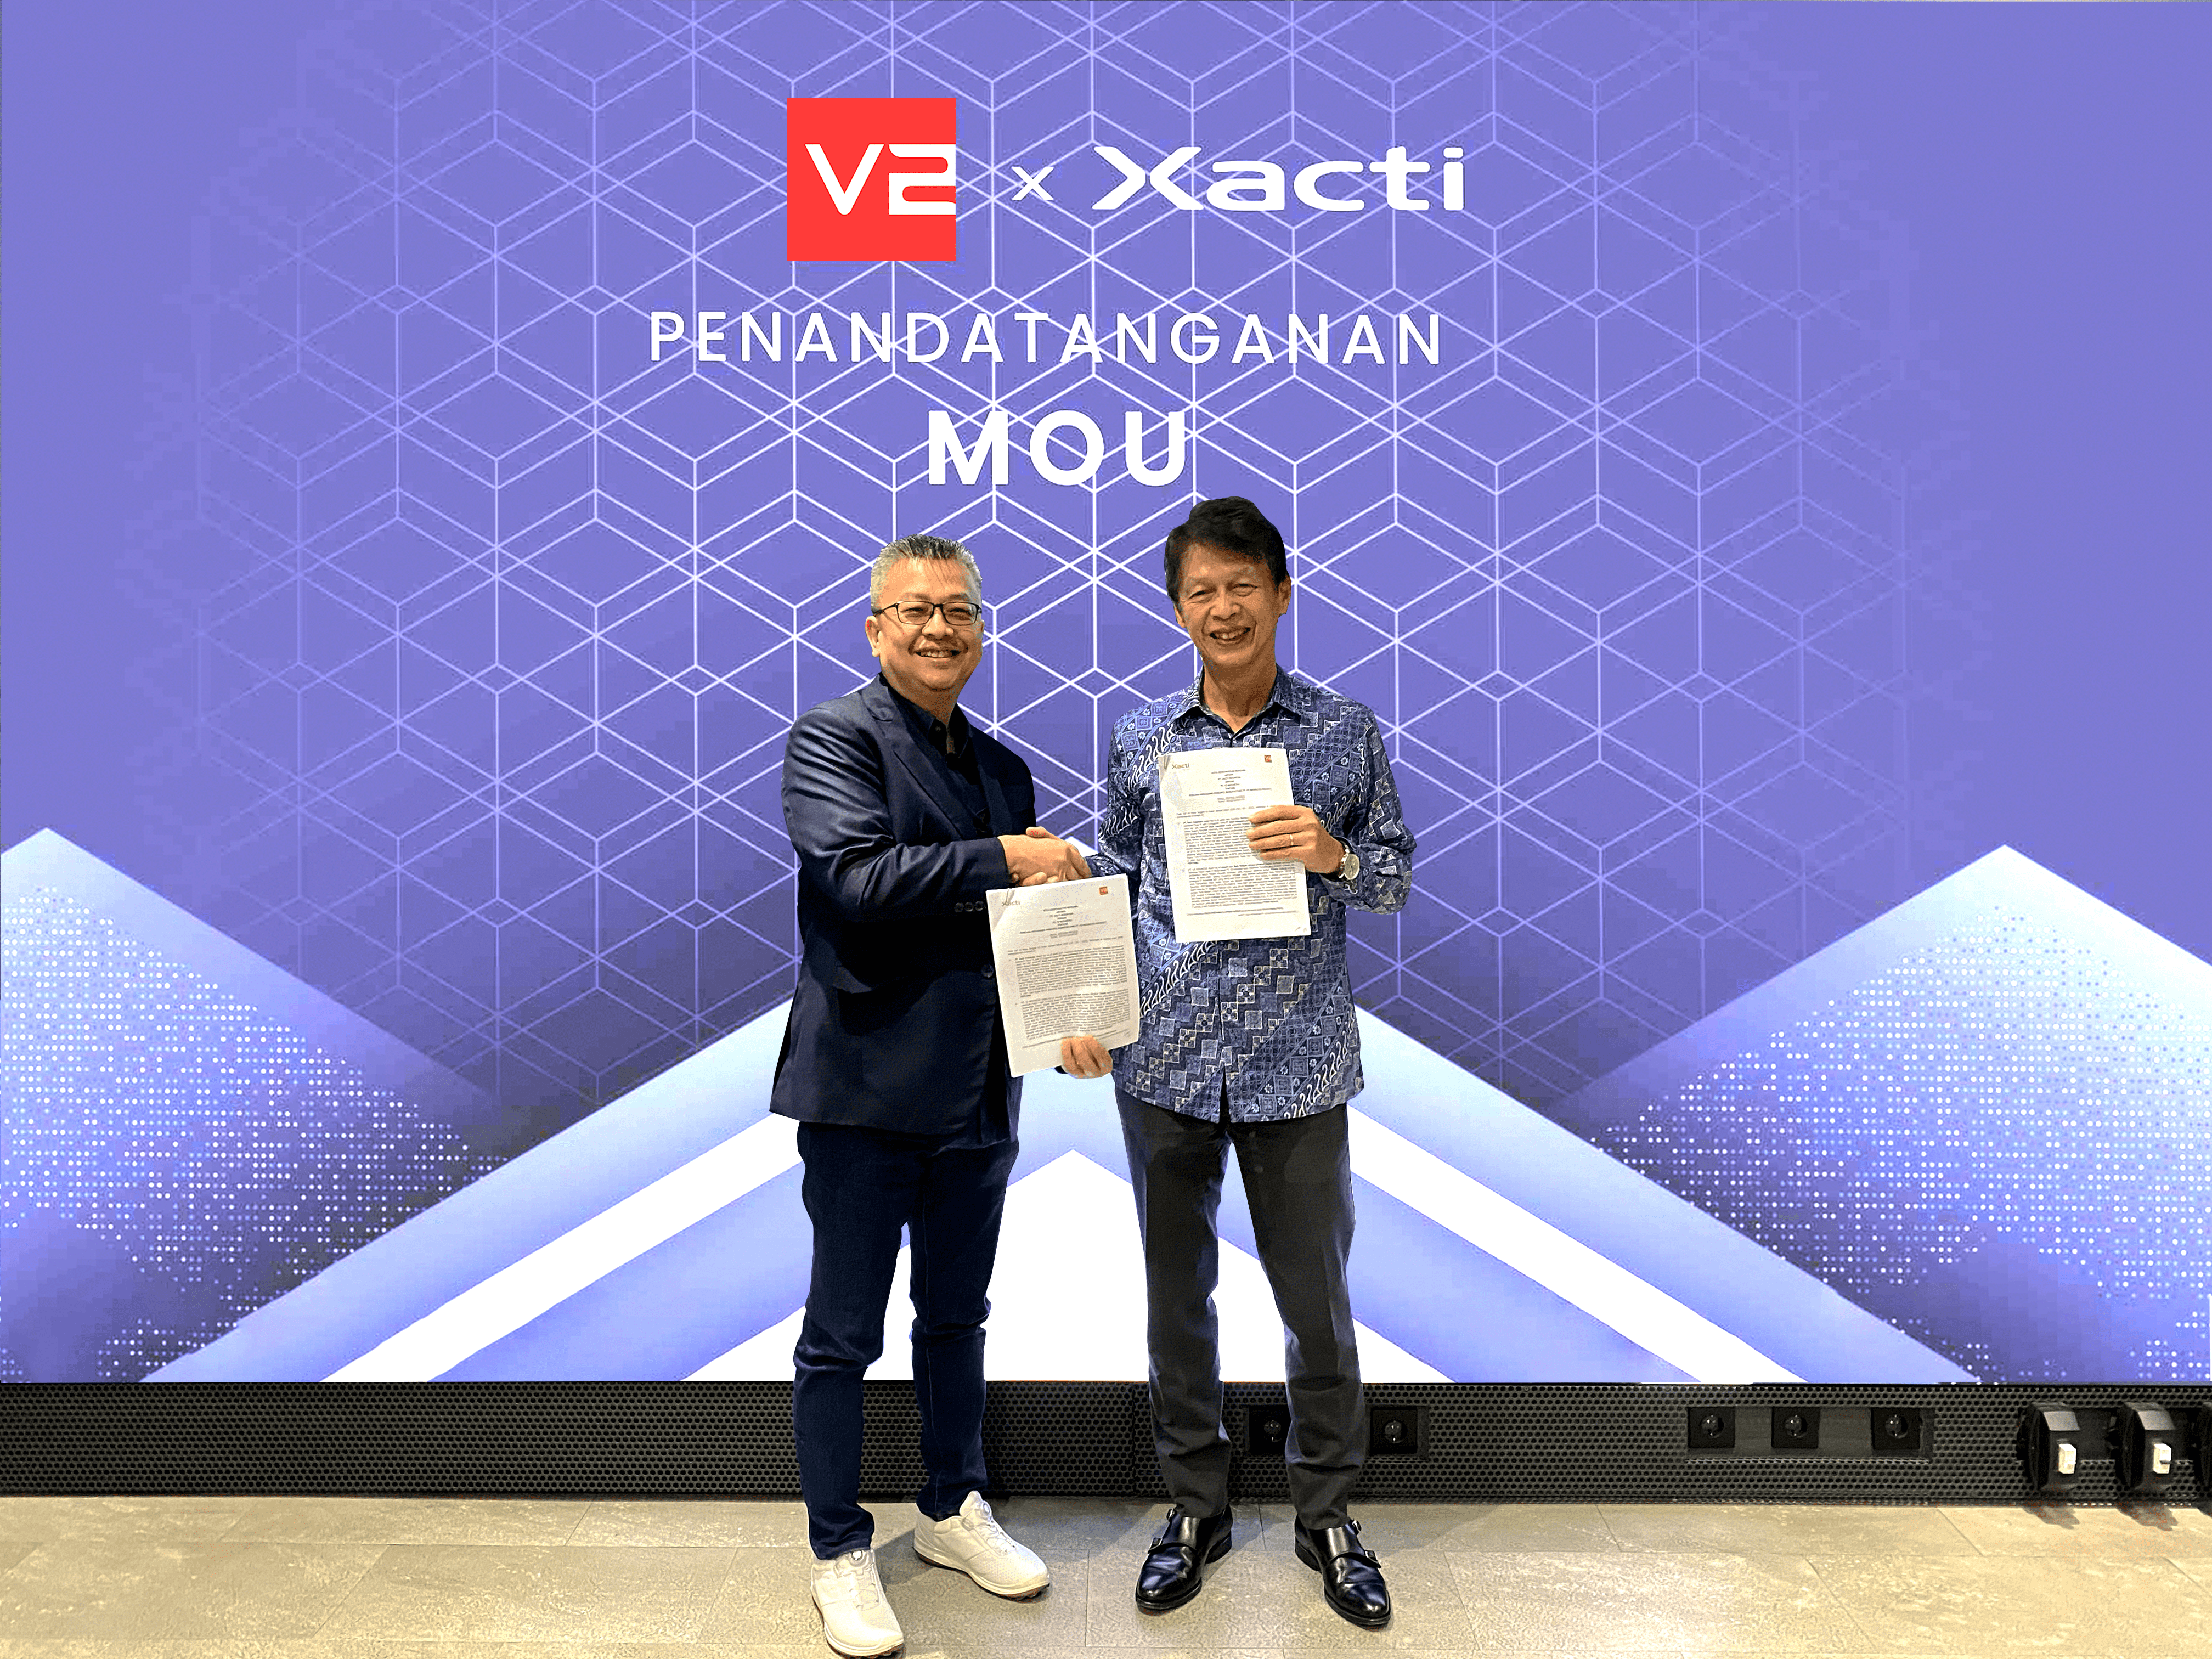 V2 Indonesia Collaborates with PT Xacti Indonesia to  Support TKDN Program as a Pioneer of SMT Process in  Domestic LED and Videotron Production